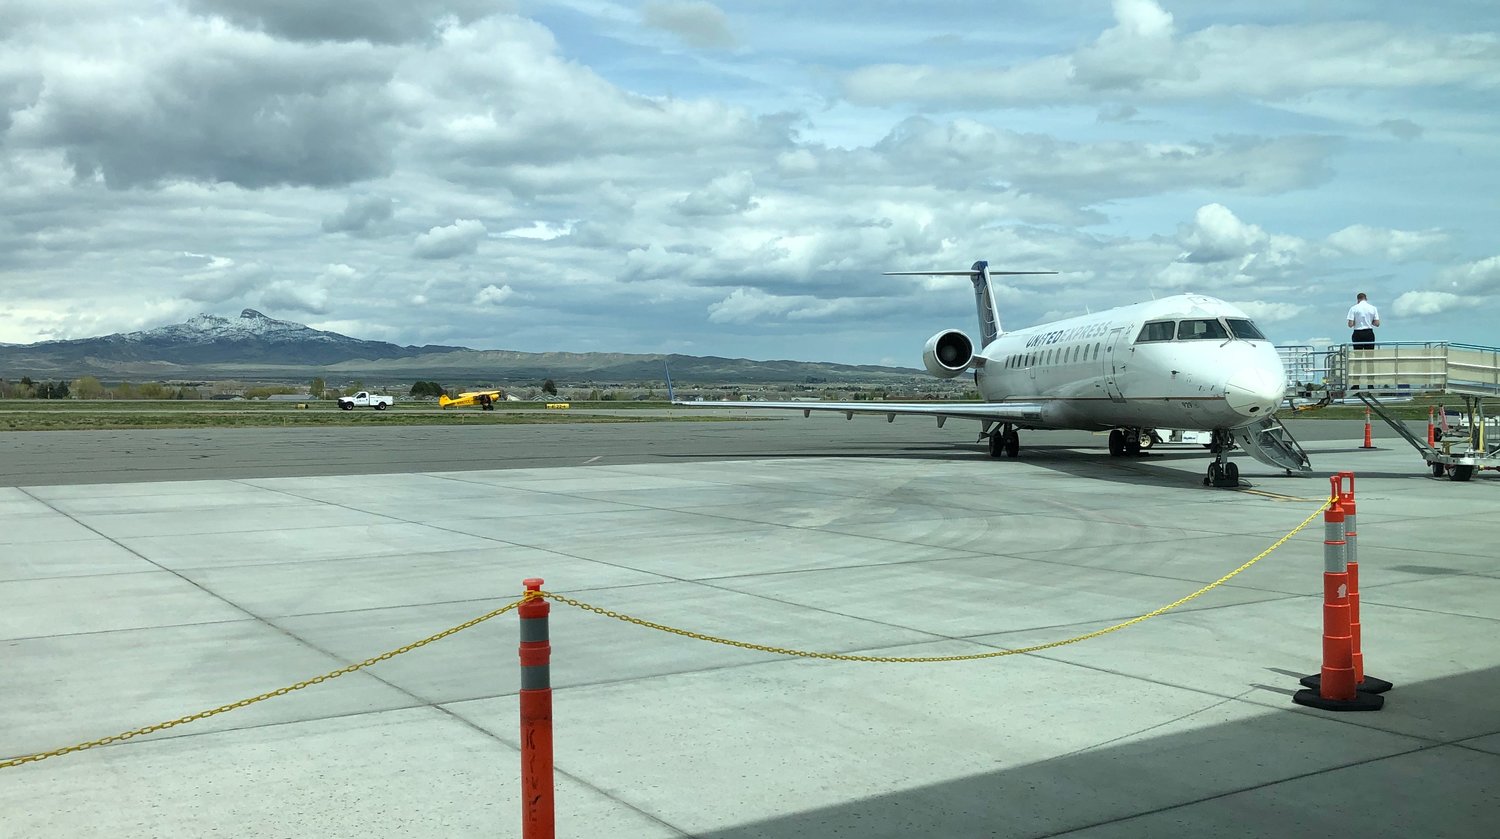 While a pilot from a delayed United flight watches, a private plane is moved along the runway after crashing at Yellowstone Regional Airport Saturday morning.